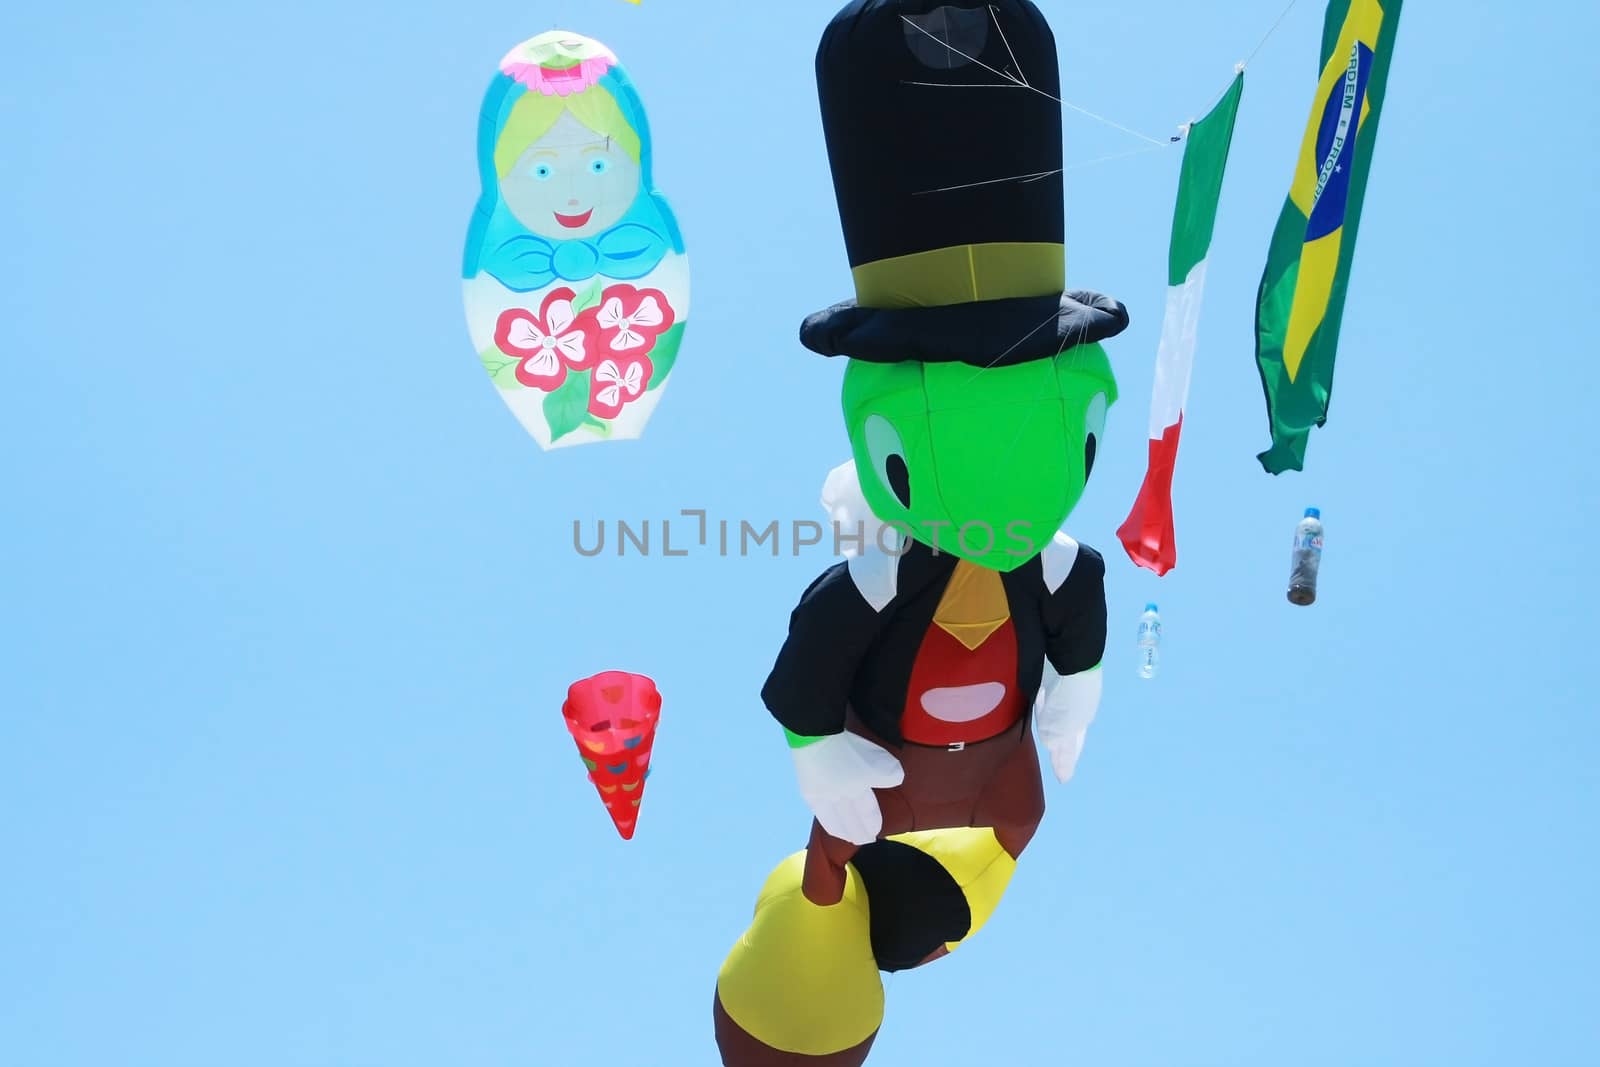 Kite with cartoon character's shape flying in the air against blue sky